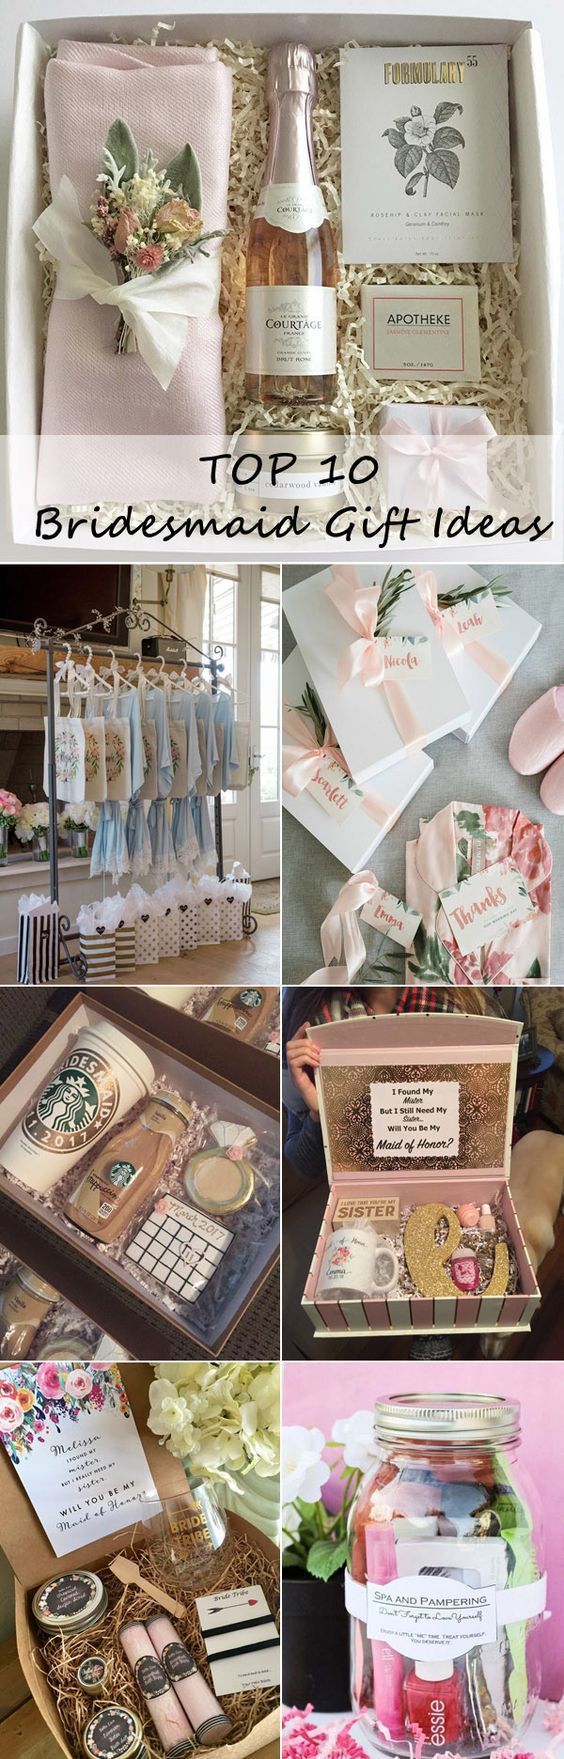 Your bridesmaids will love these bath and body gifts. Enjoy them on a bridal spa...